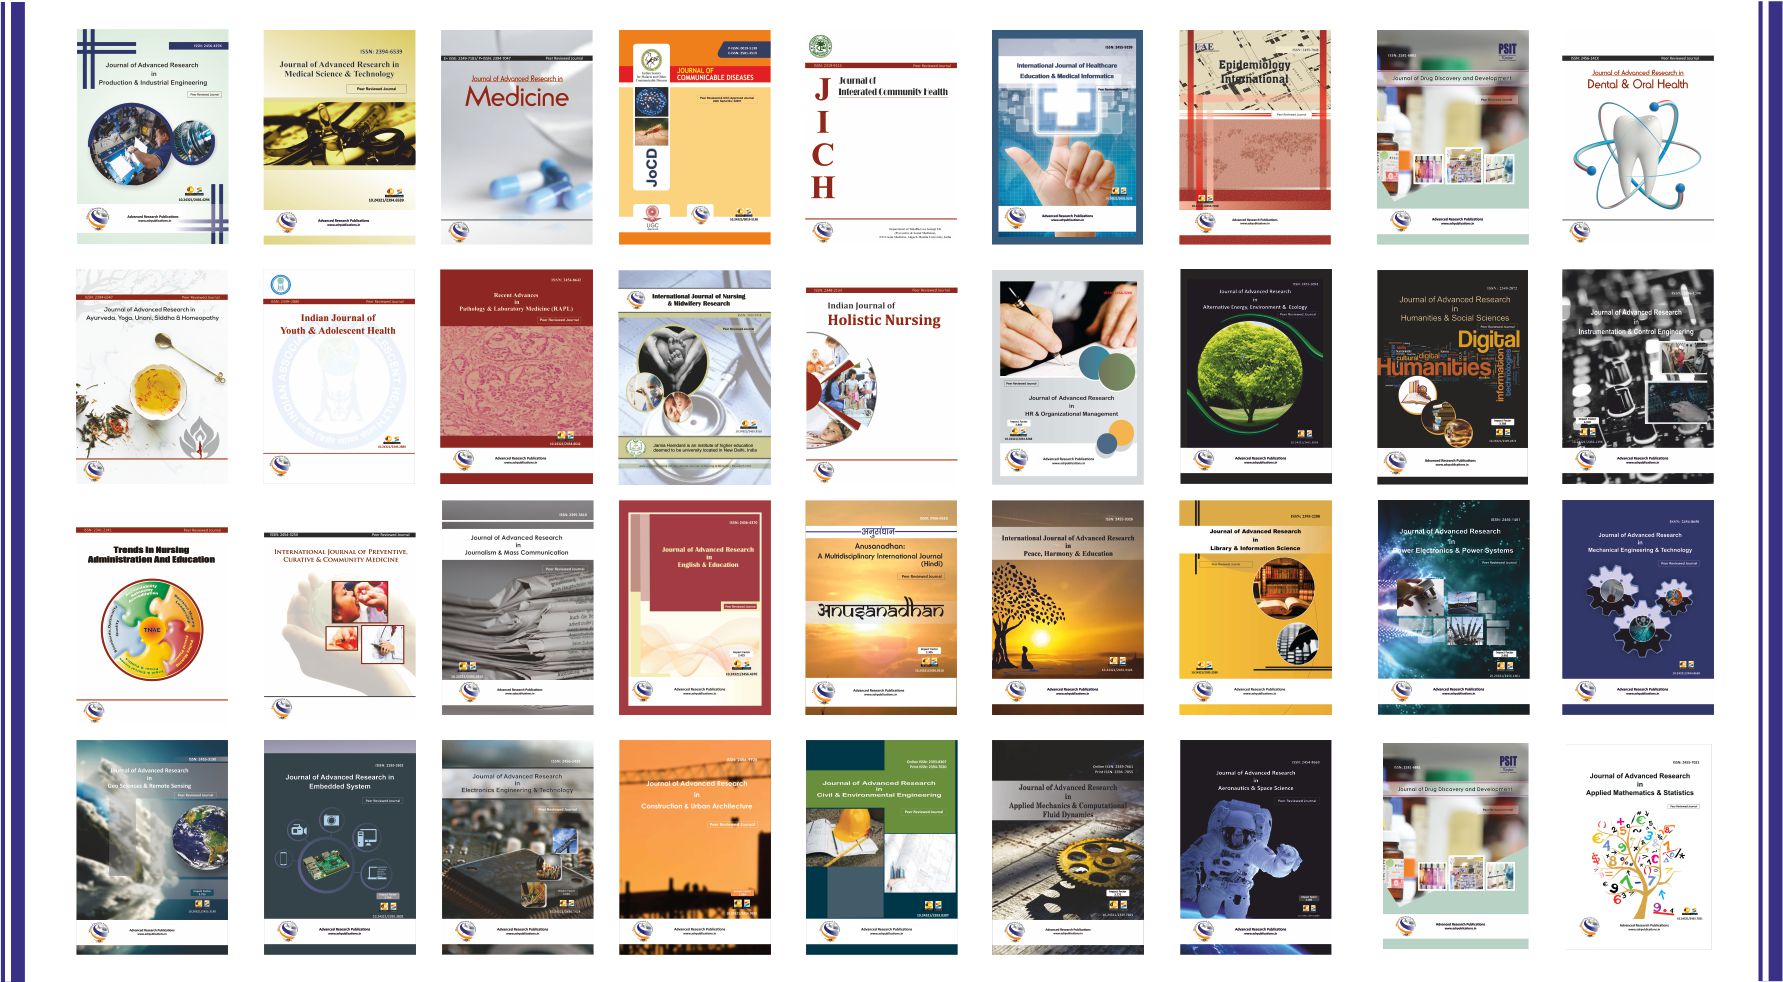 Publication of Medical Research in Journals